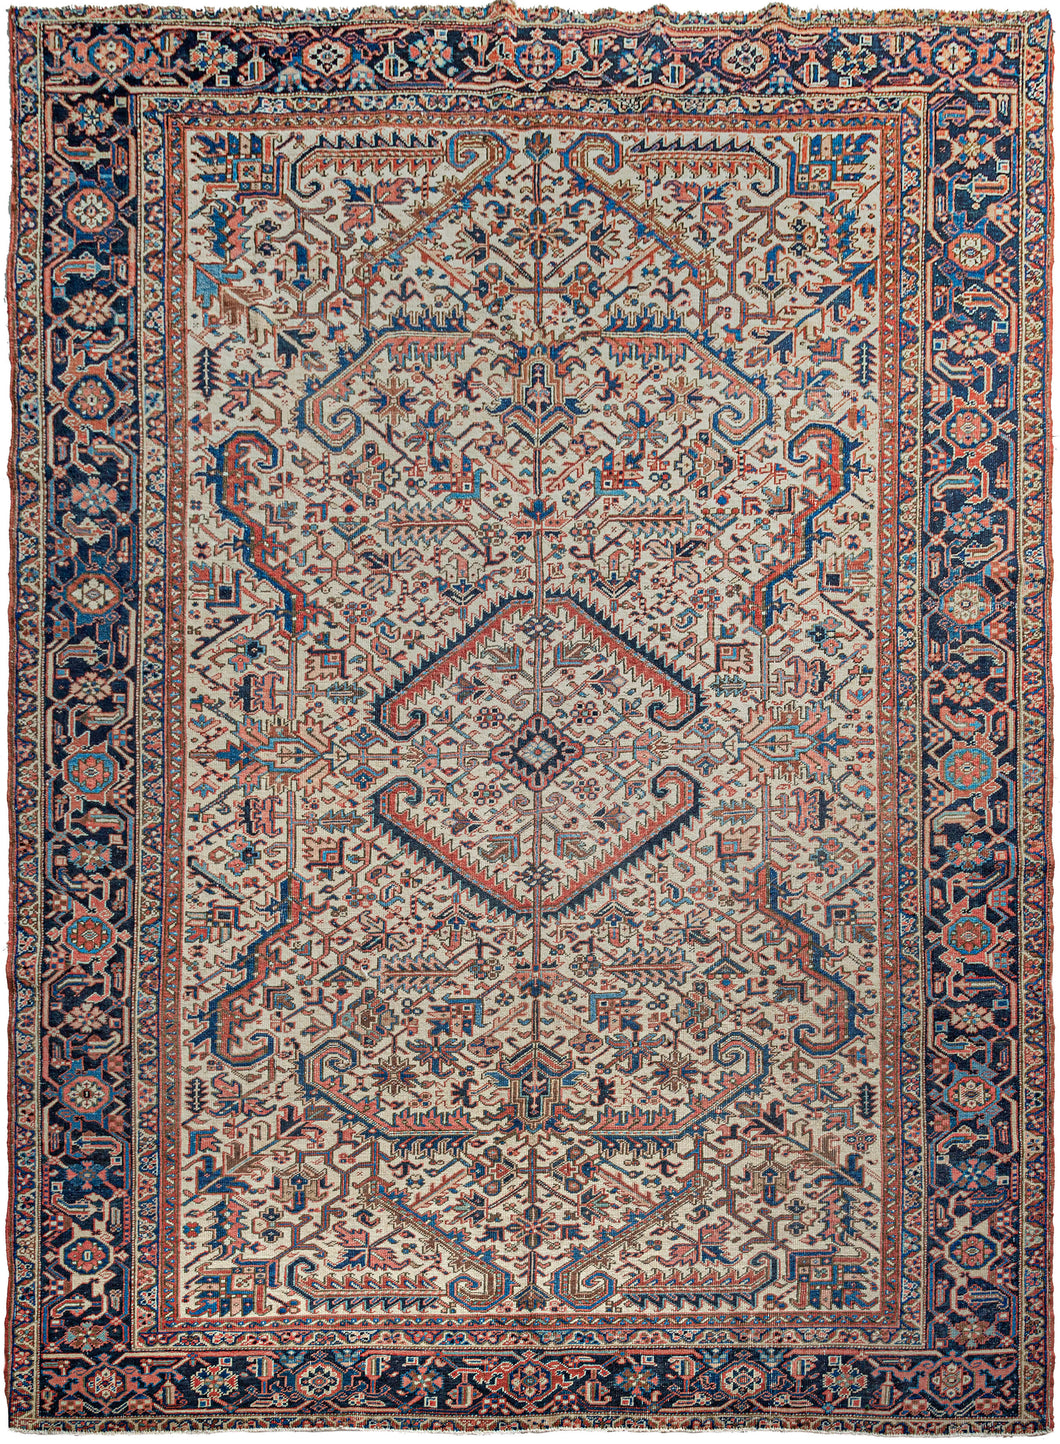 Antique Heriz rug featuring a graphic all-over design of geometric rosettes and sawtoothed serrated leaves in blues, reds, yellow and soft pink on a rare ivory ground. Although the design is all-over as opposed to the classic Heriz central-medallion motif, the compelling leaves draw the eyes to the center.  The main border is composed of a reciprocating palmette design showcasing various well-executed blue tones that frame the ivory field perfectly.